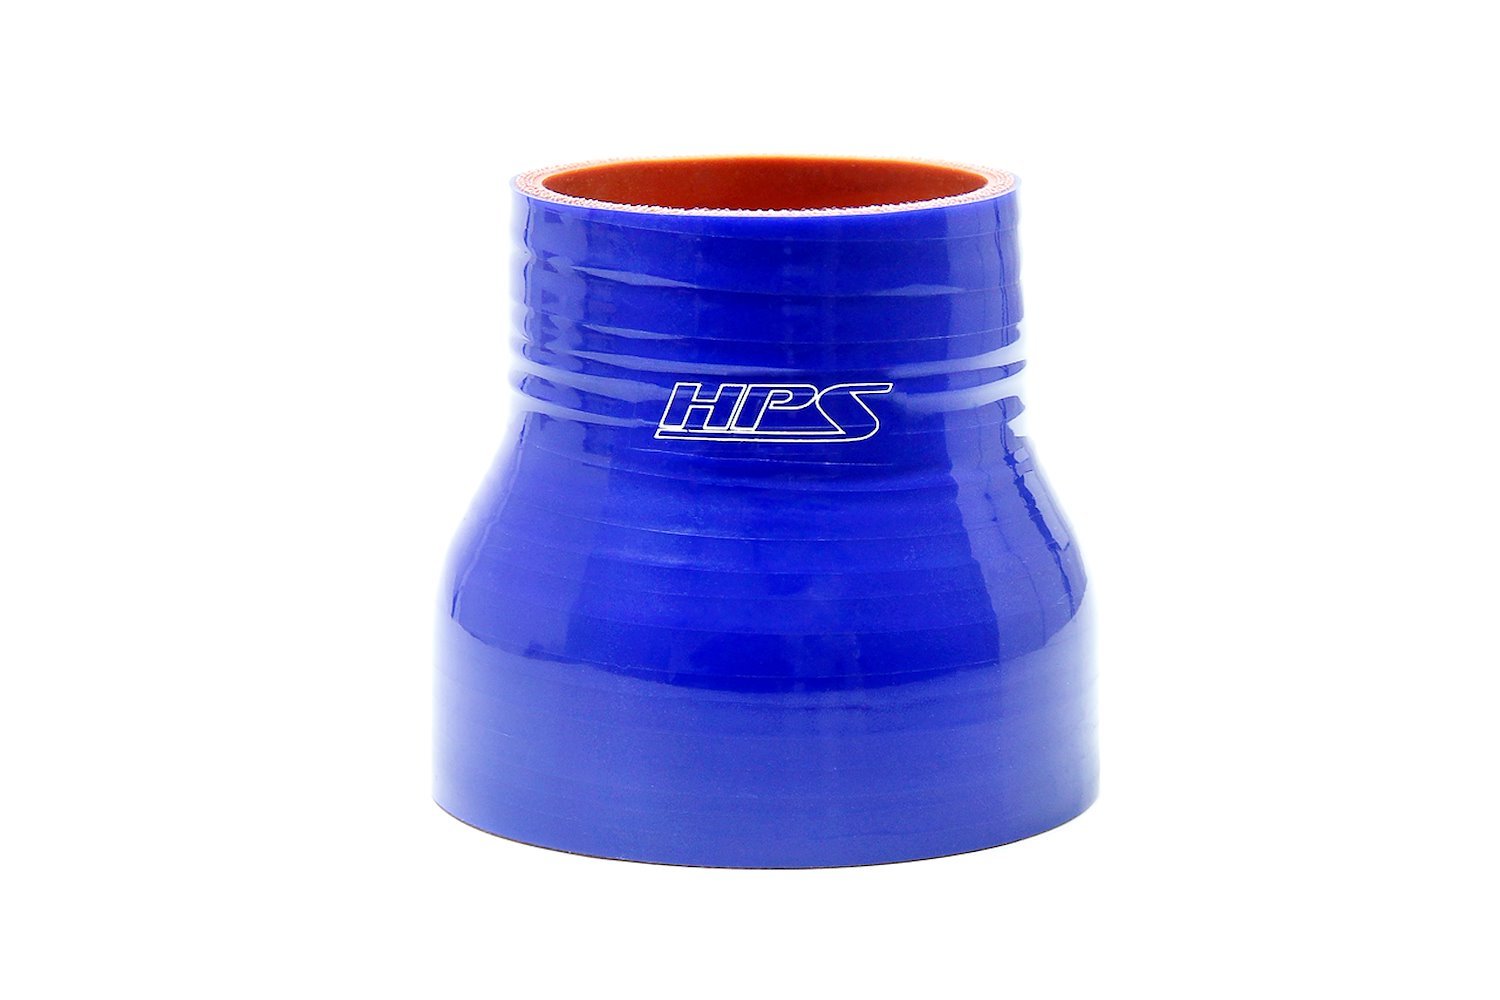 HTSR-300-375-BLUE Silicone Reducer Hose, High-Temp 4-Ply Reinforced, 3 in. - 3-3/4 in. ID, 3 in. Long, Blue